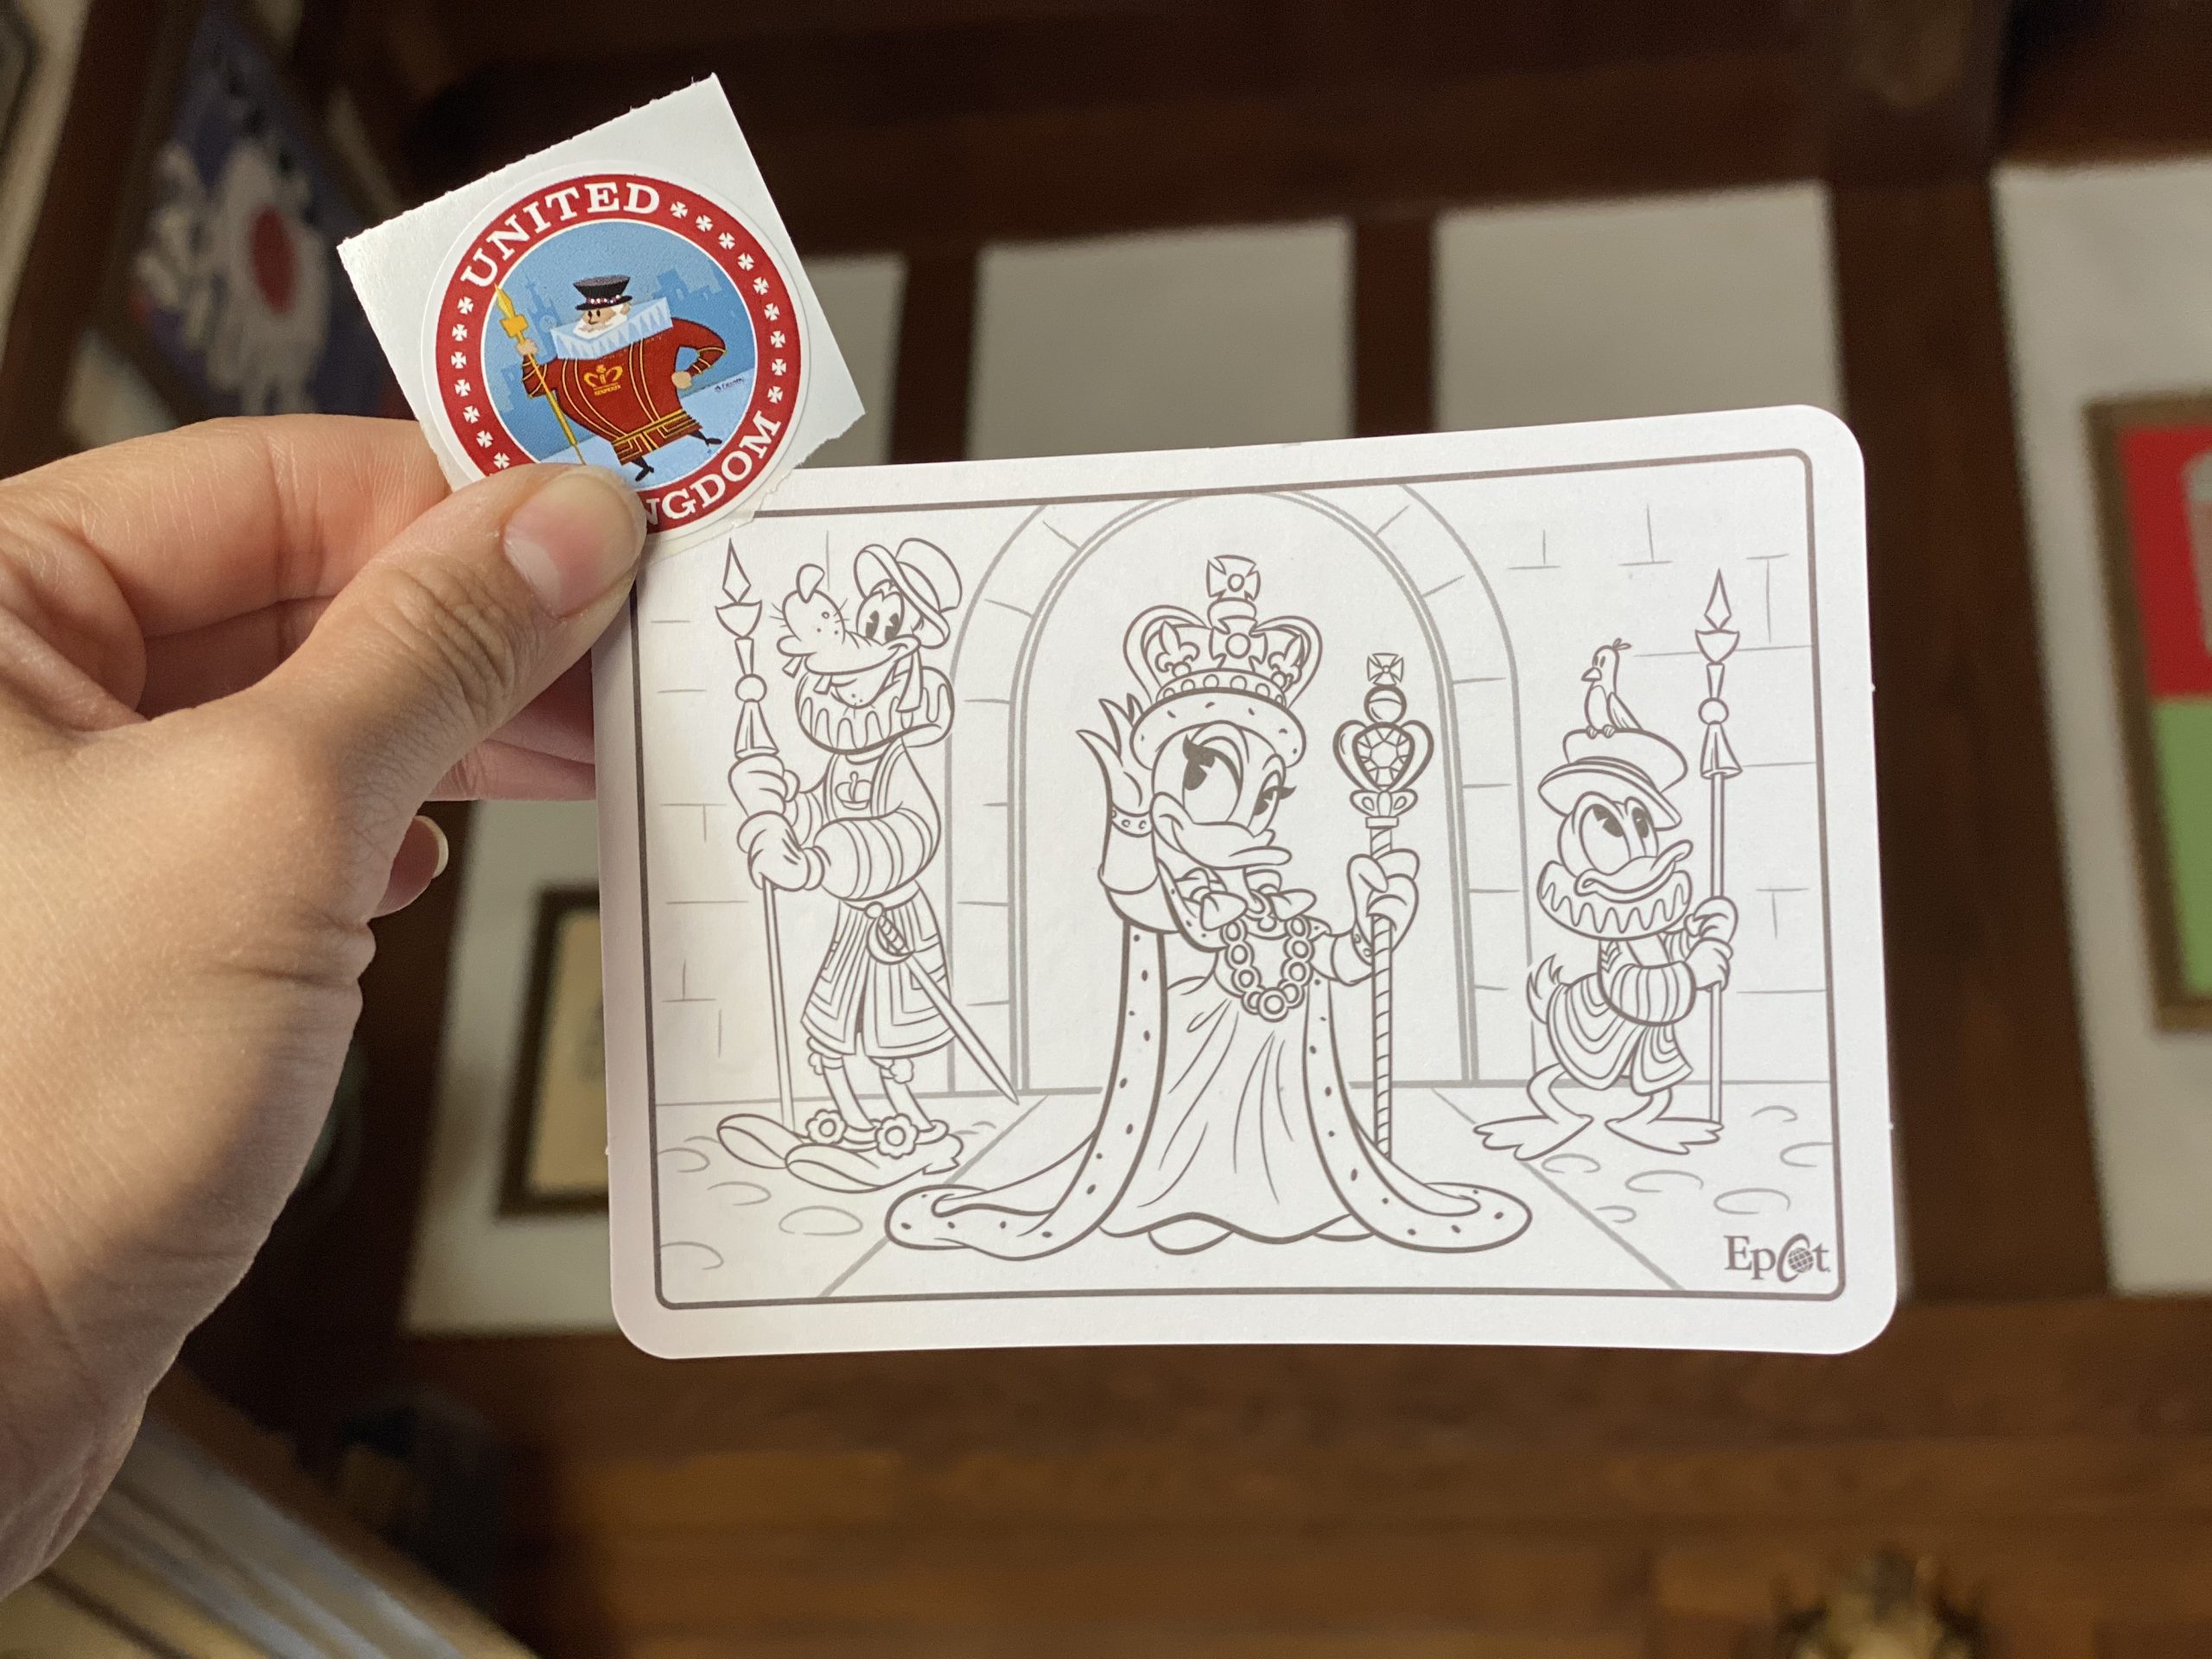 Queen Daisy with Goofy and Donald behind her on the England Kidcot card and a sticker